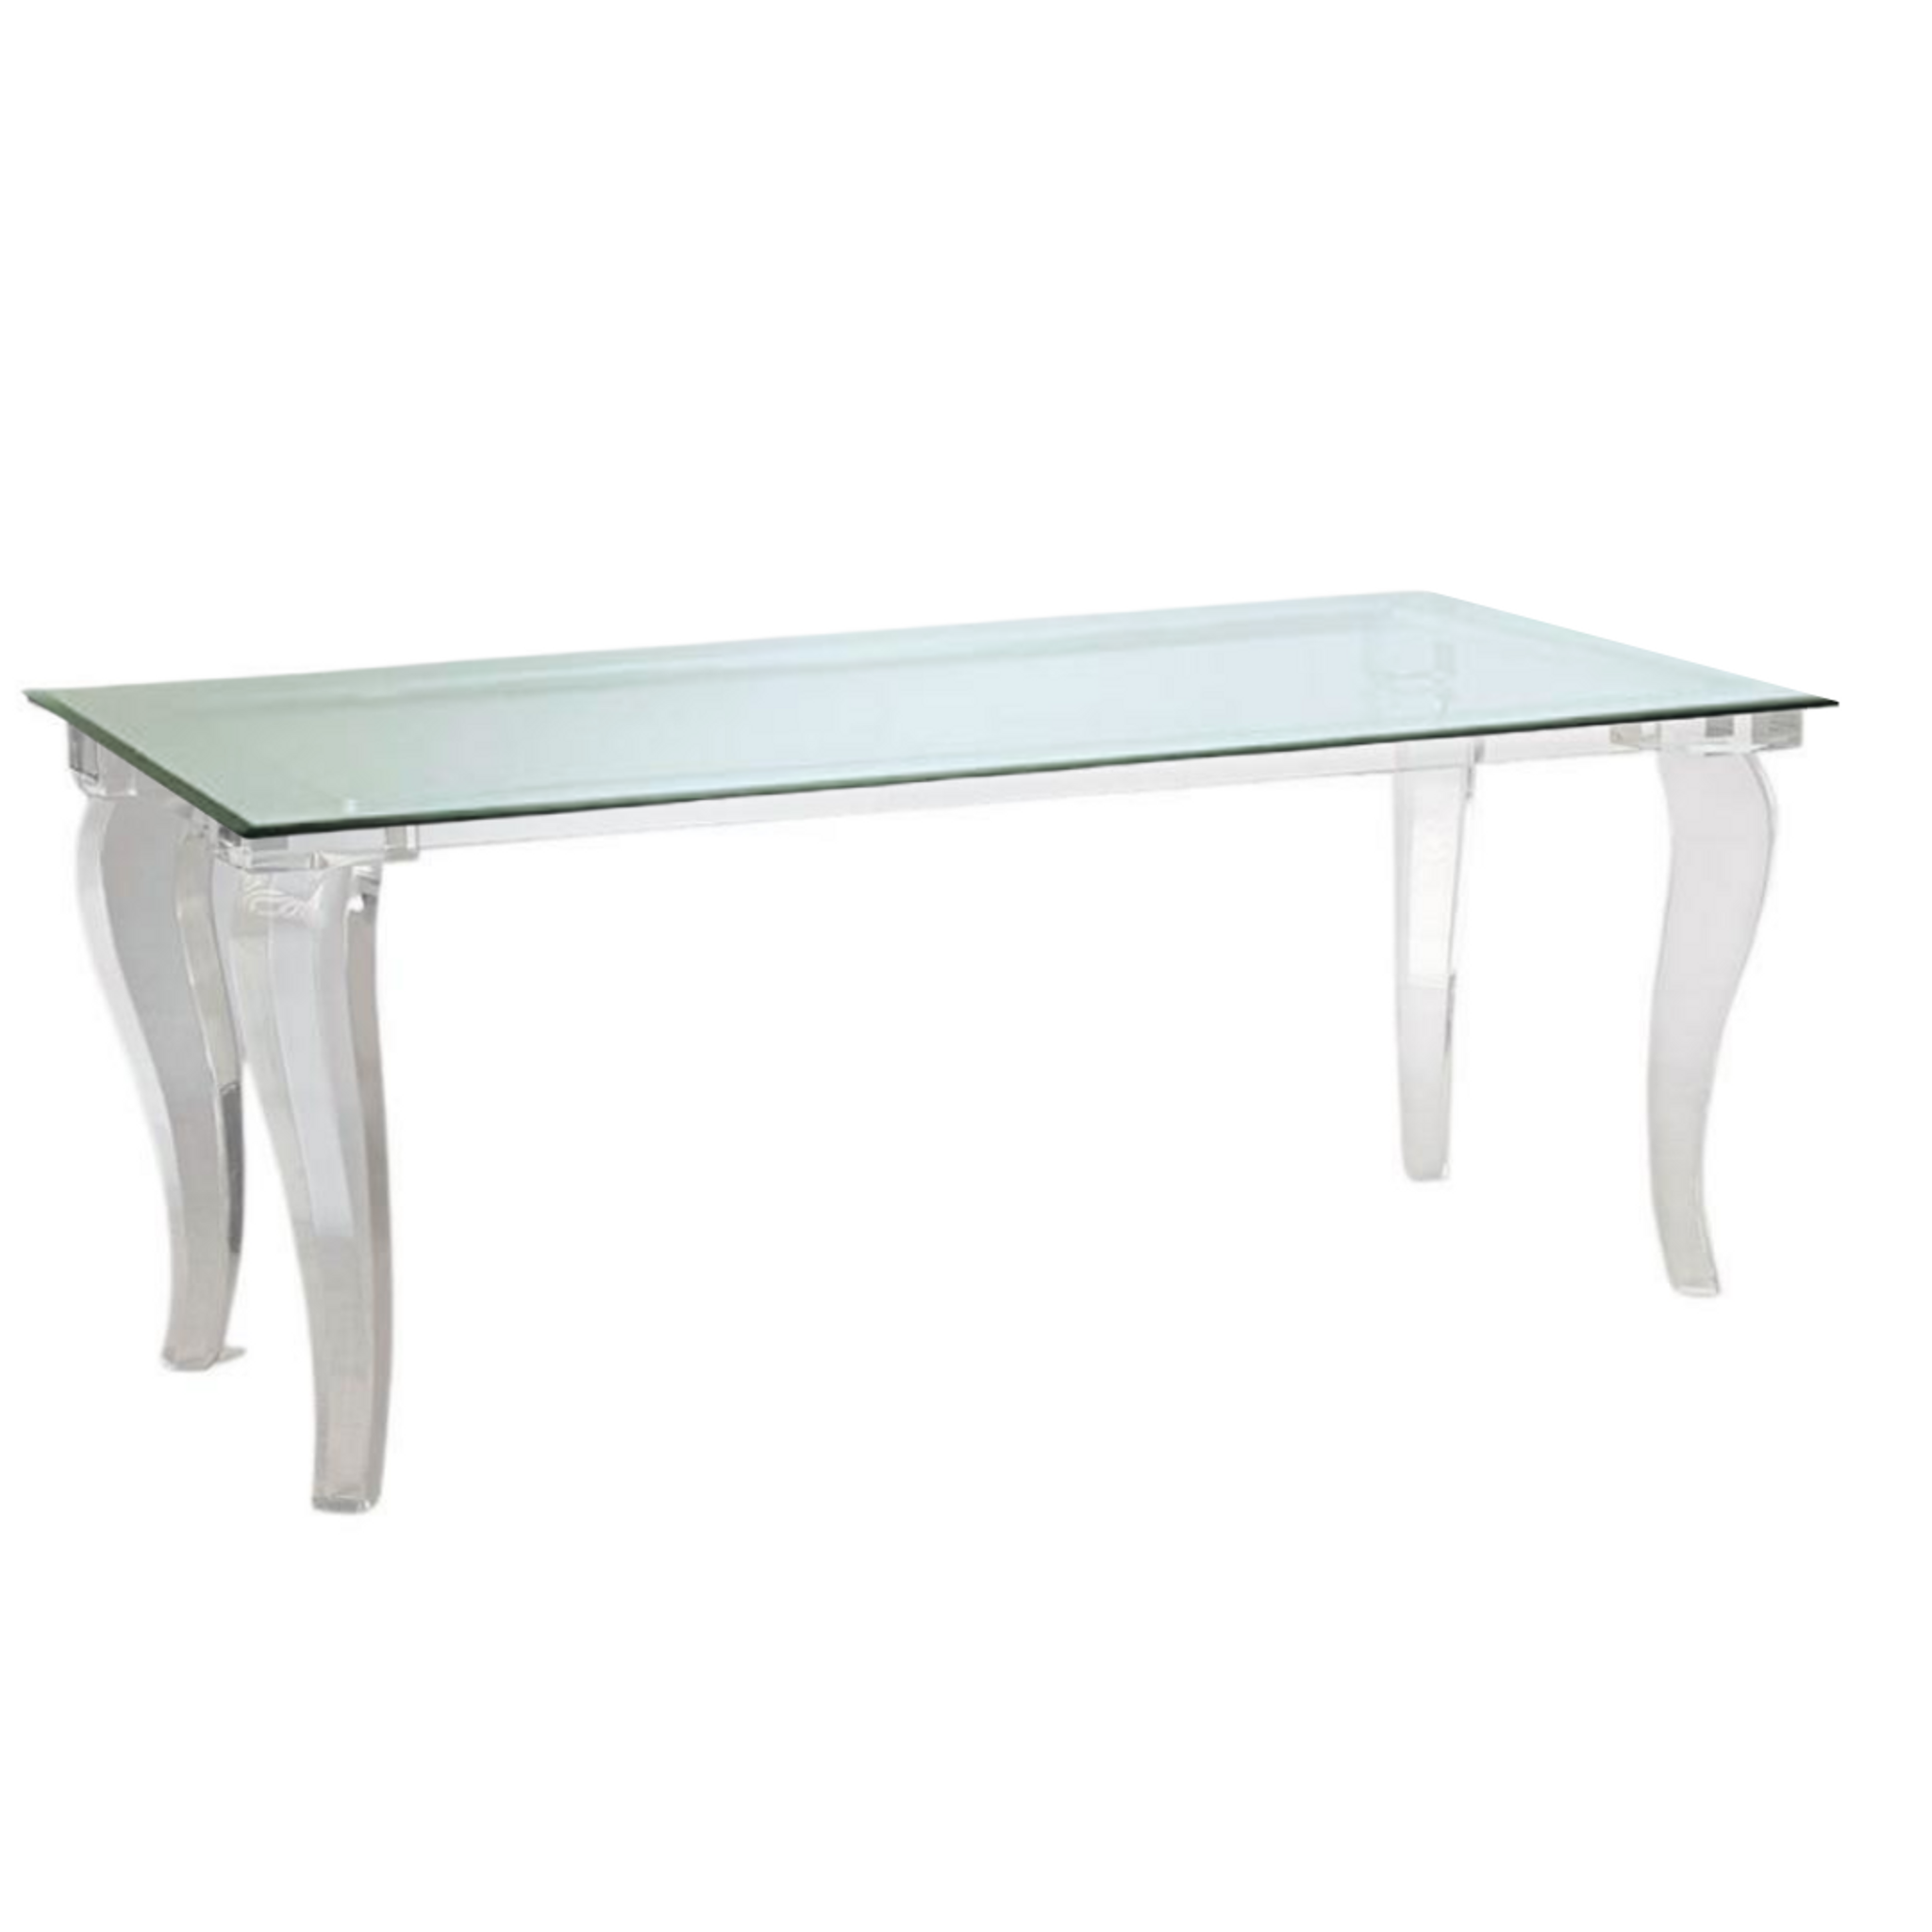 Lucite Carved Leg Rectangular Dining Table with Glass Top